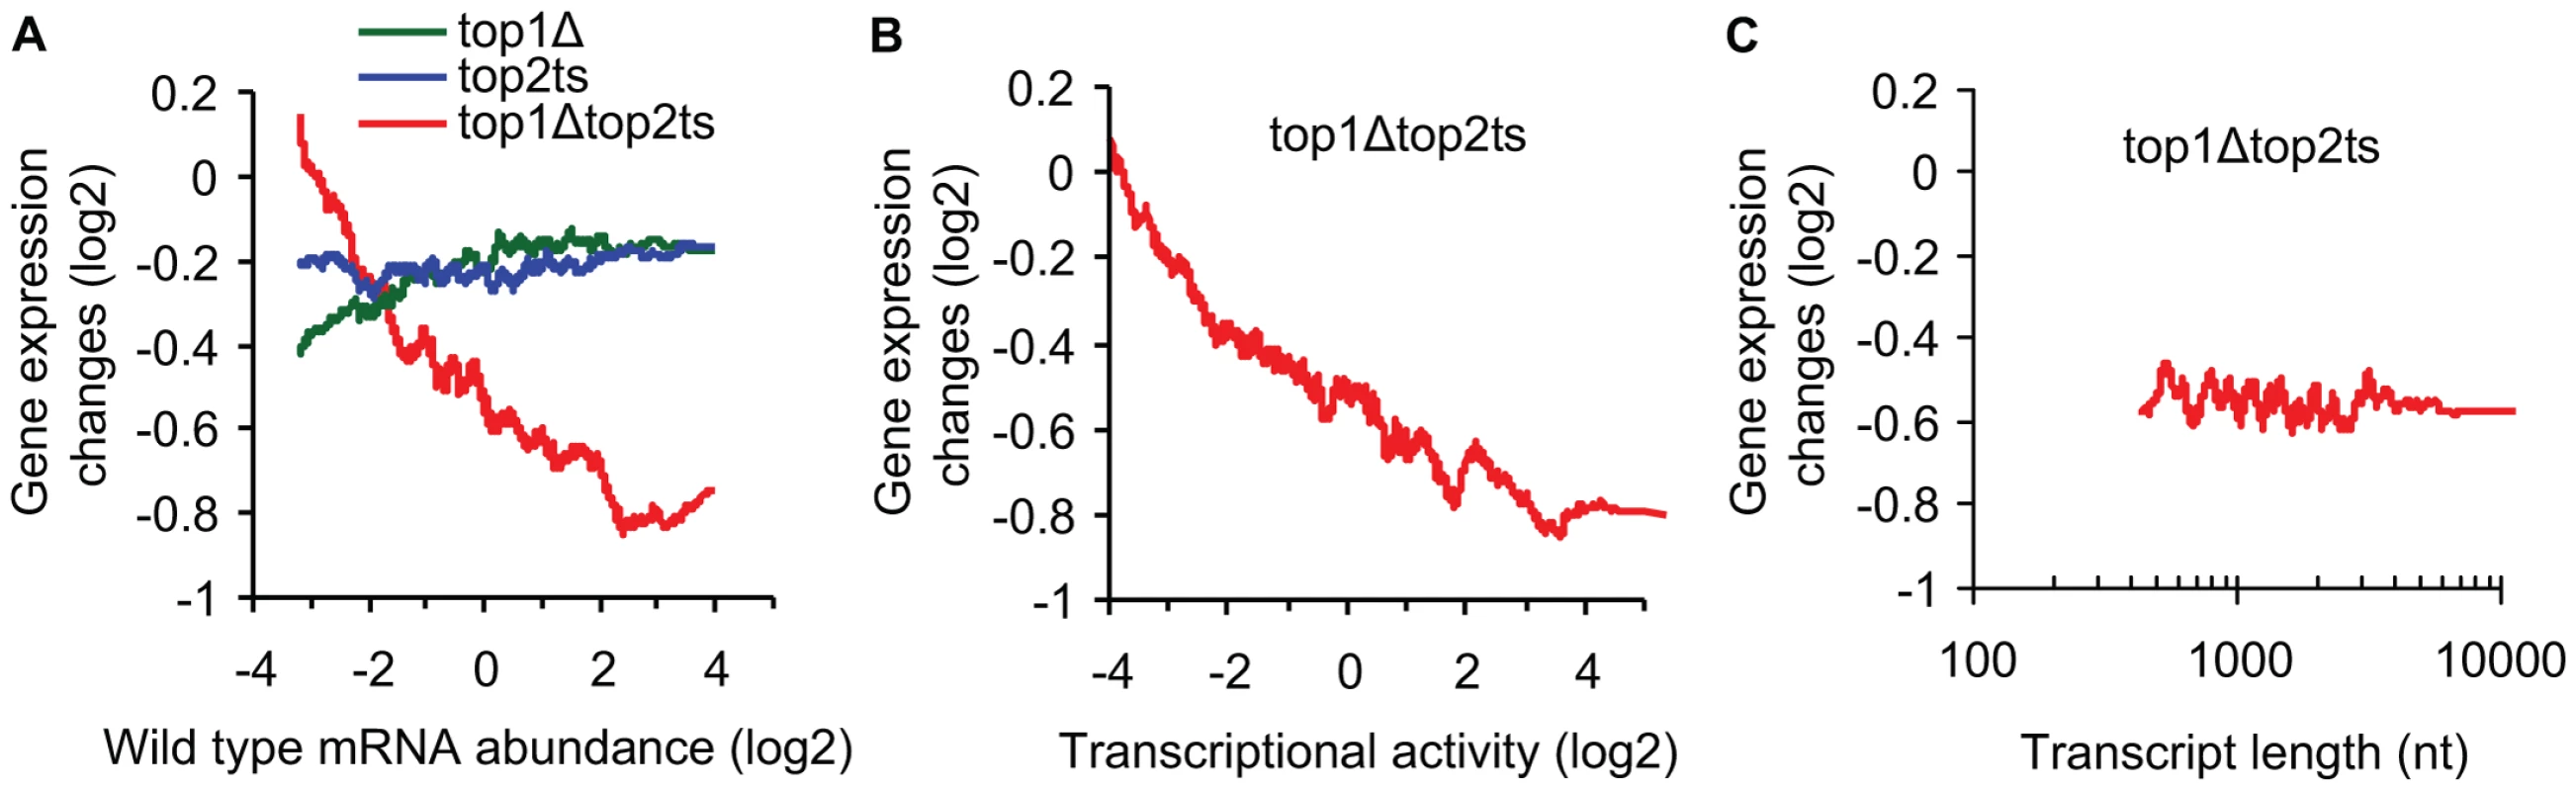 Transcriptional activity and not transcript length reflects topoisomerase dependency.